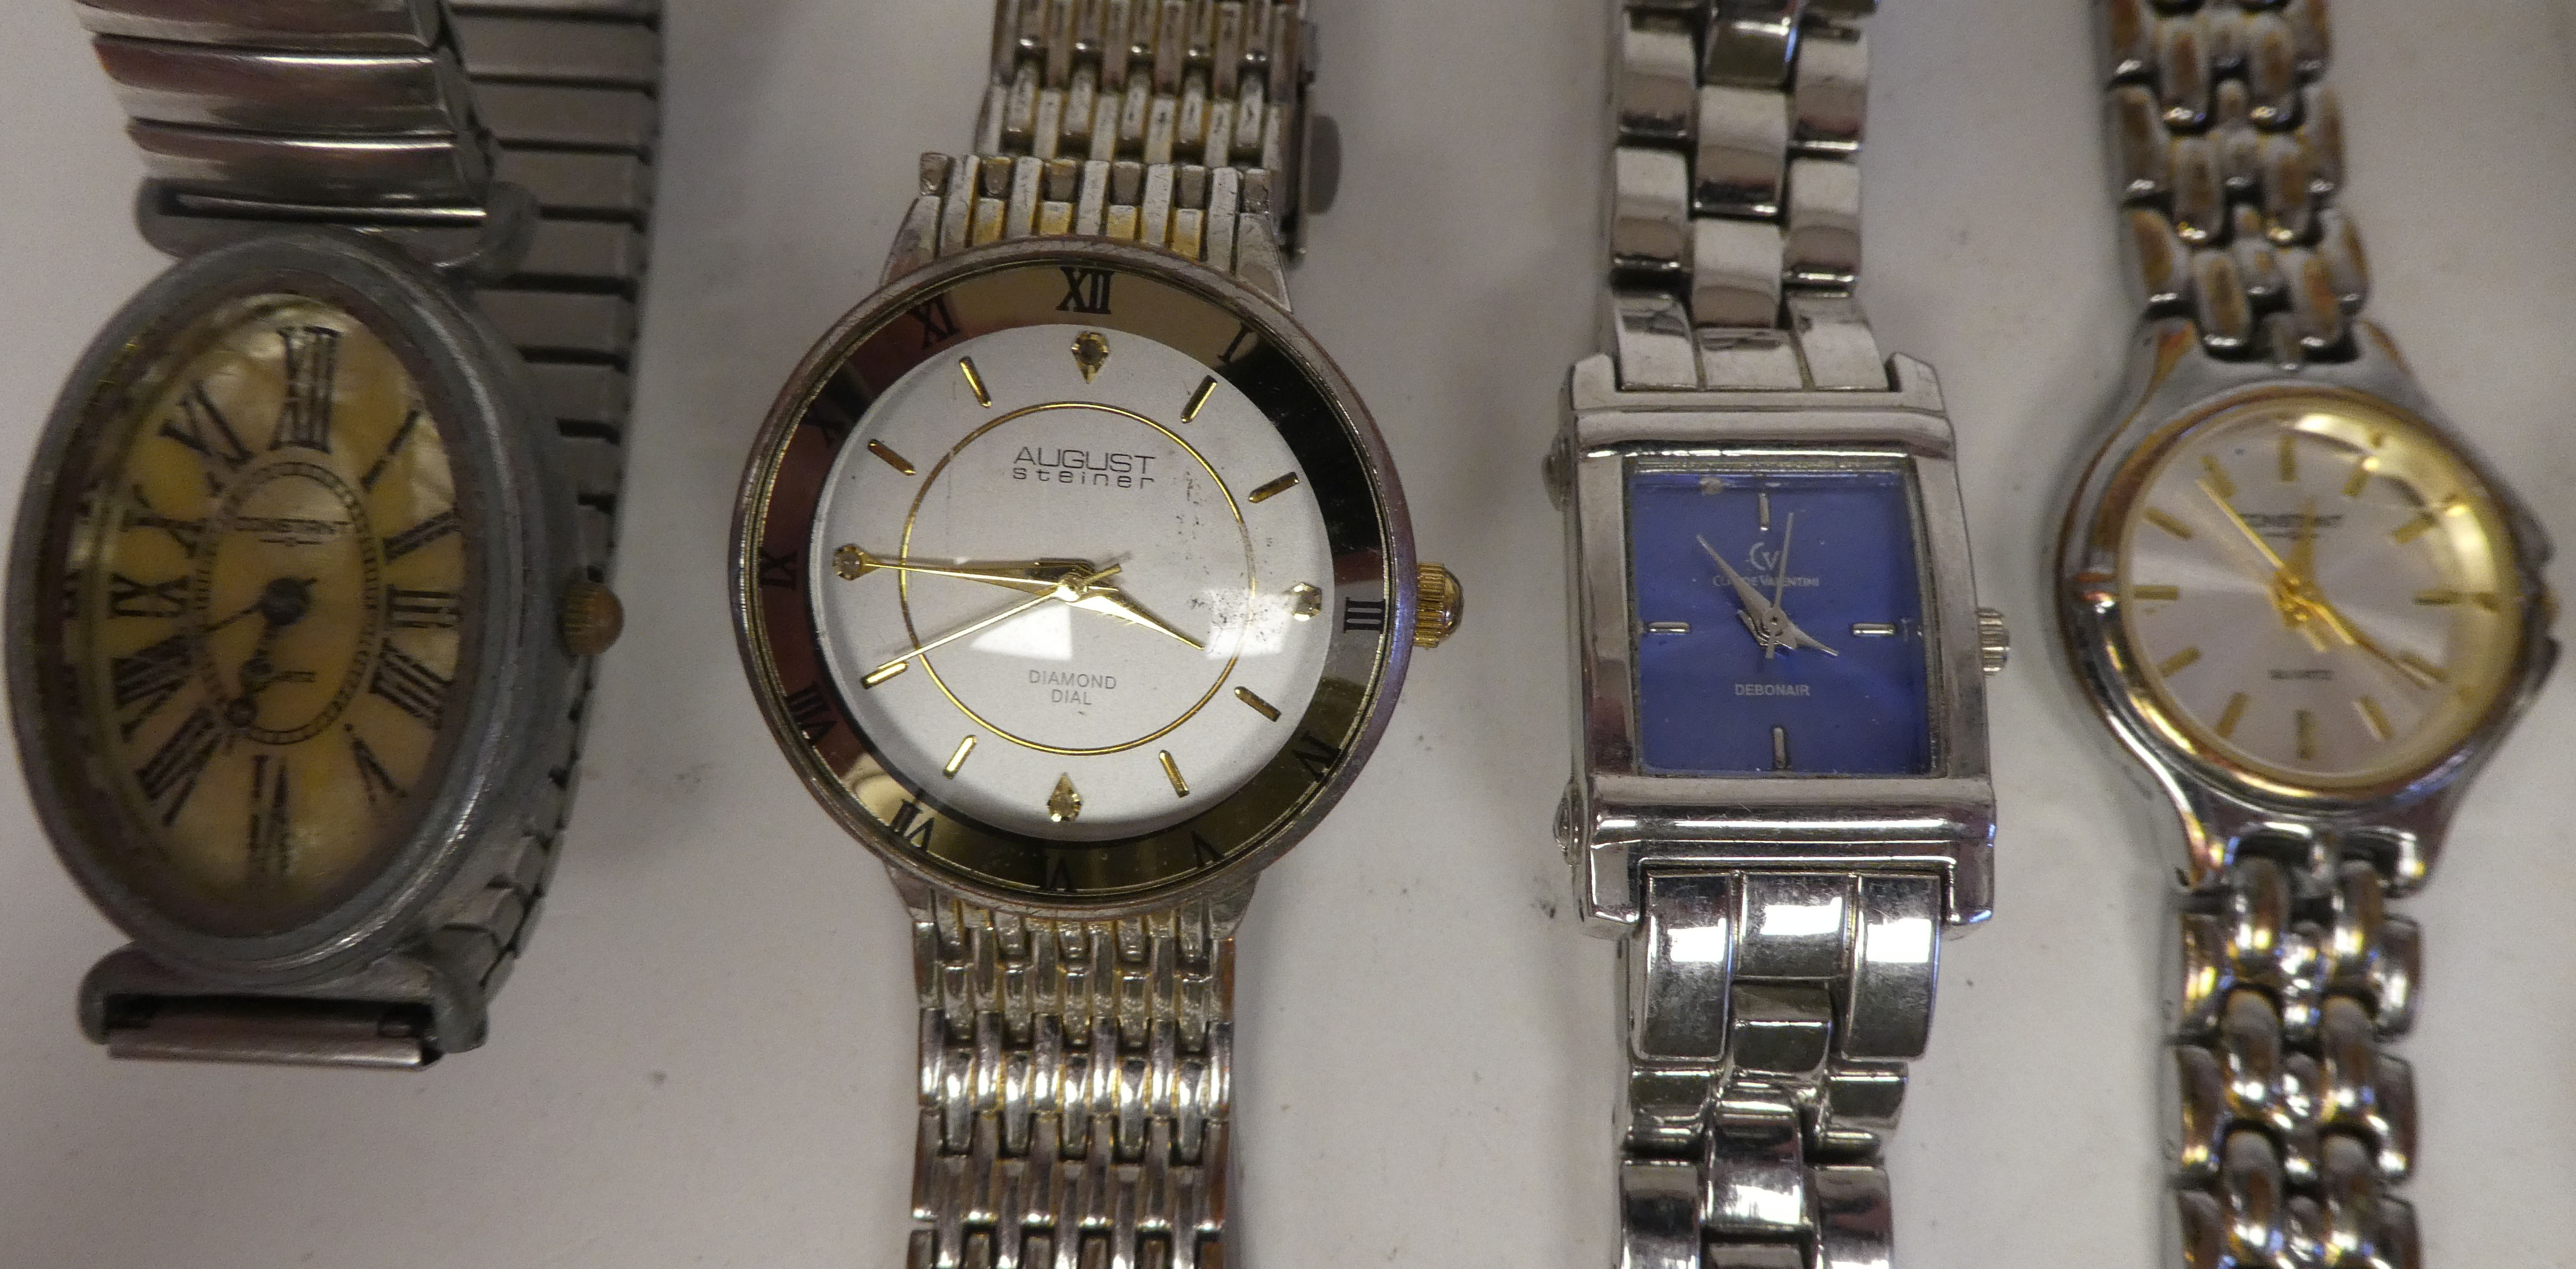 Variously cased and strapped wristwatches - Image 12 of 47